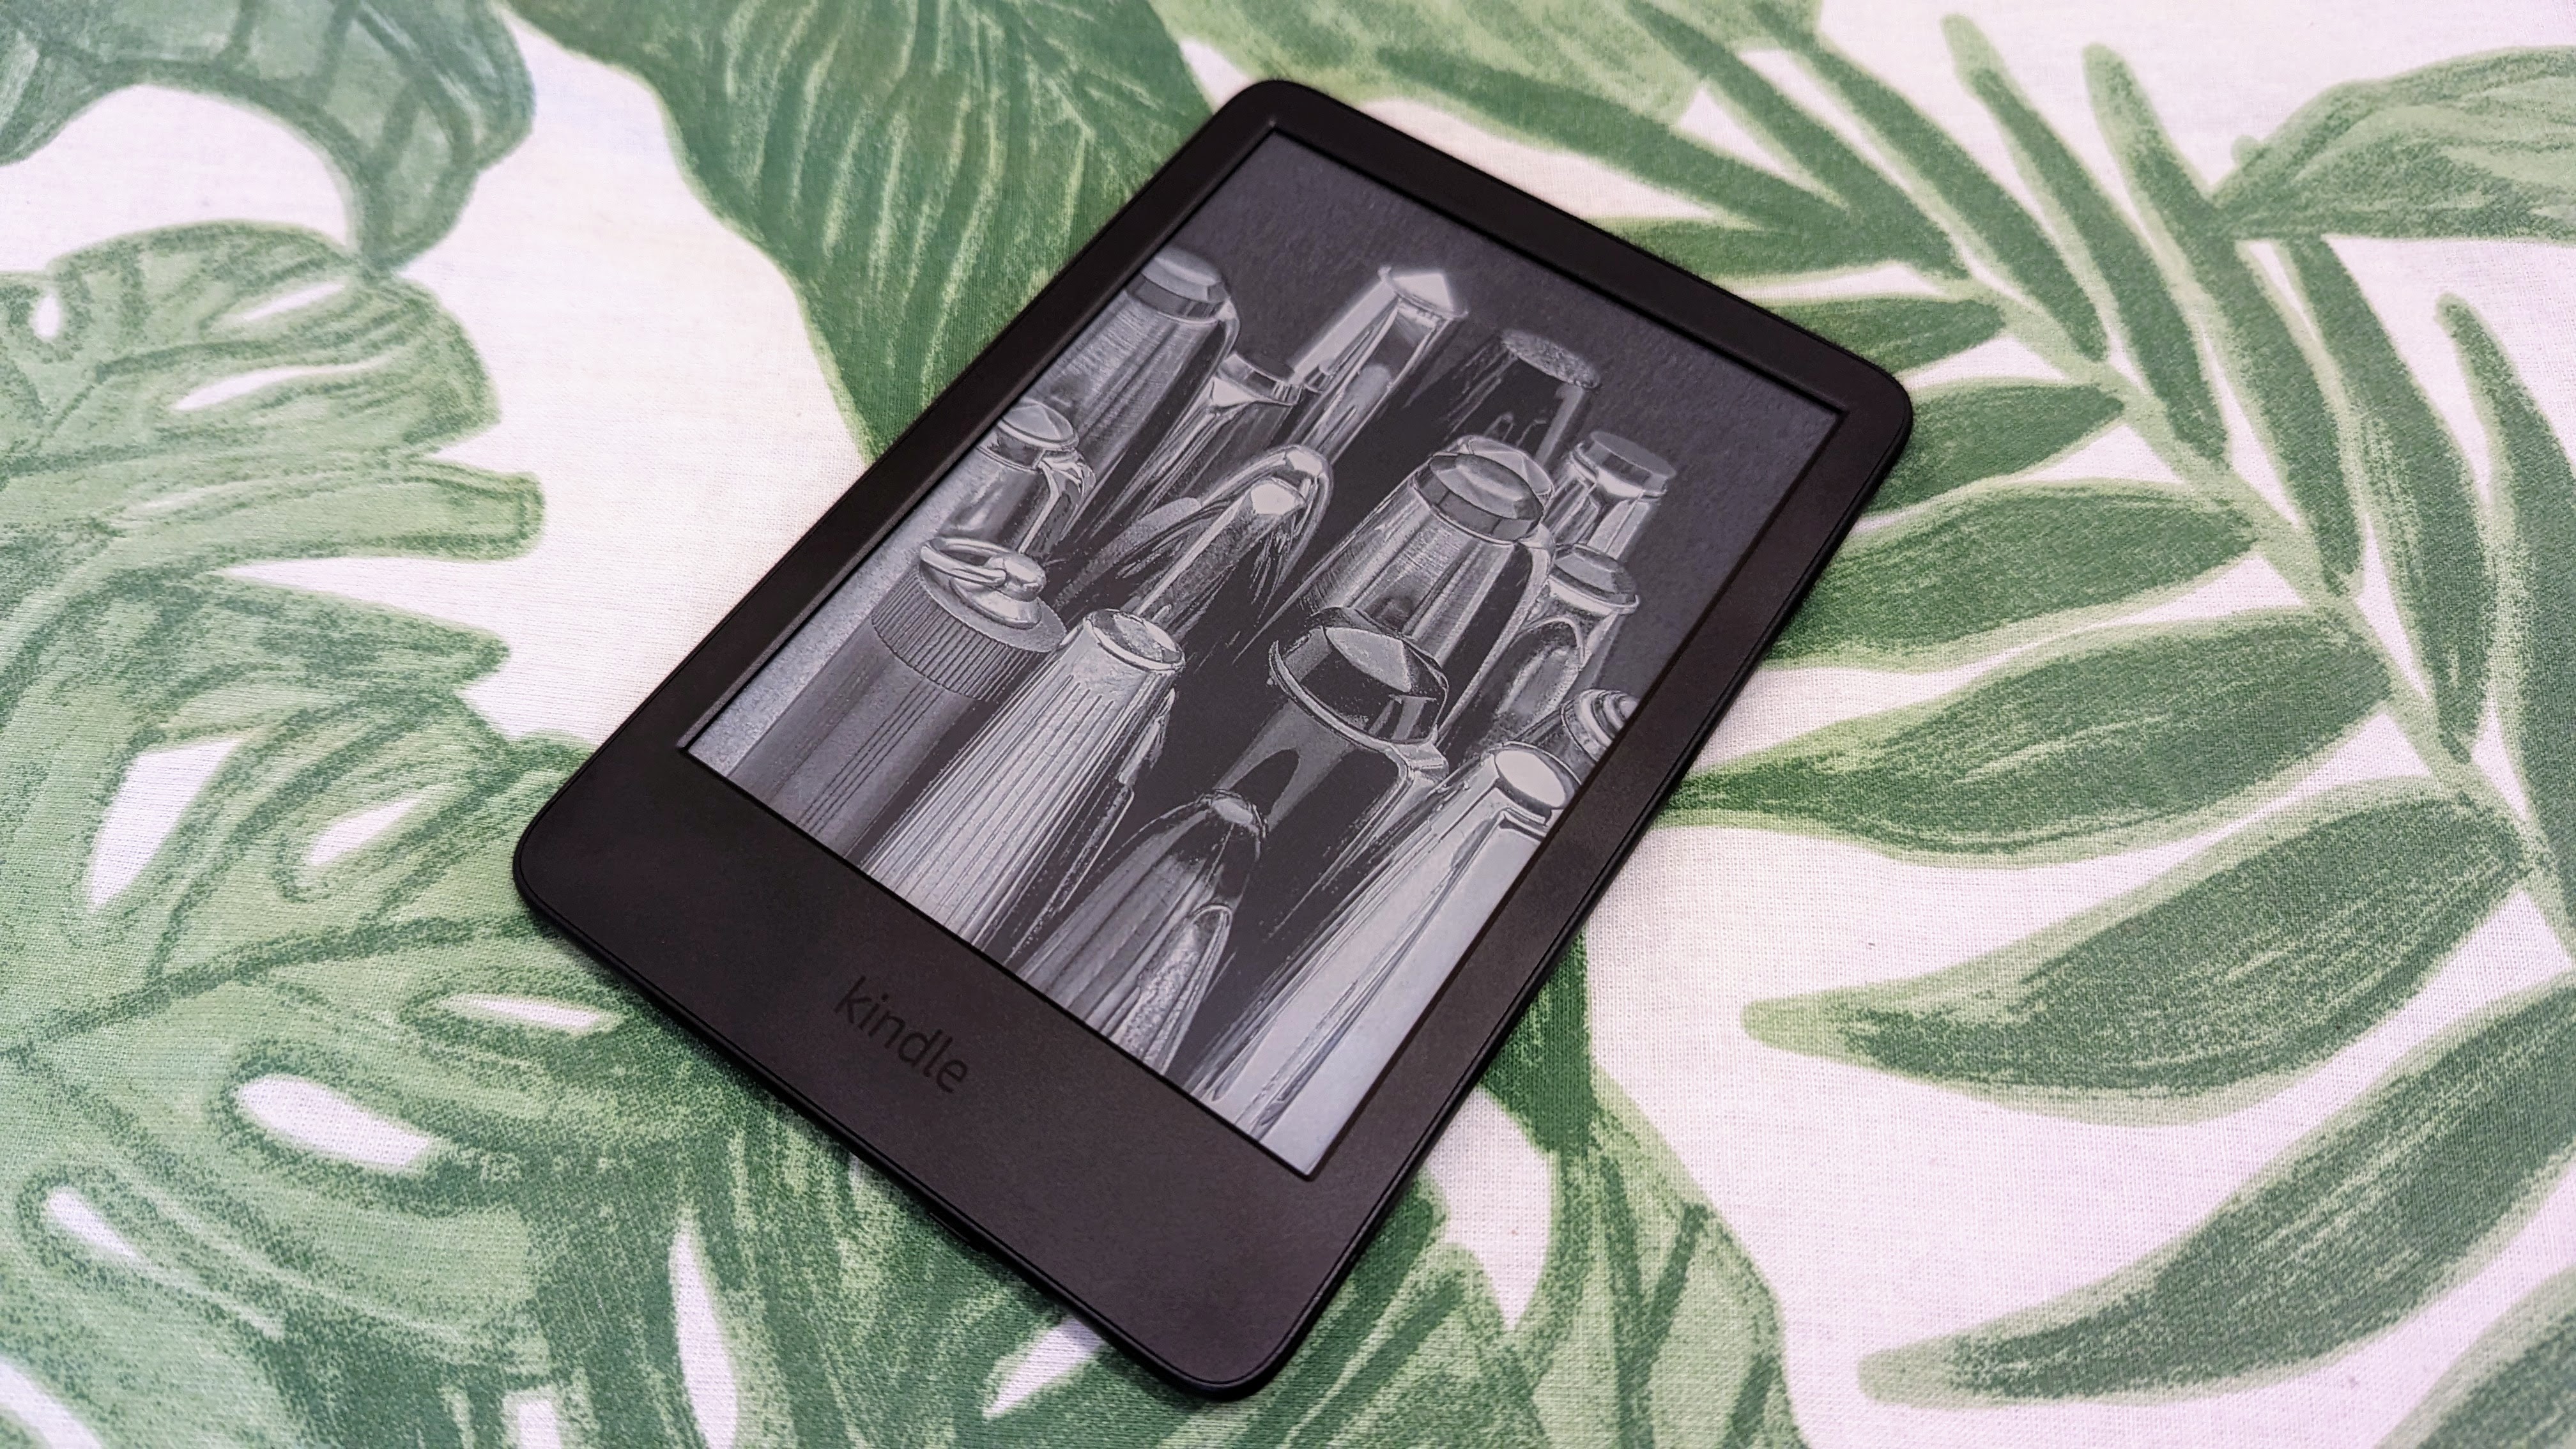 Kindle 2022 review: The best basic e-reader yet